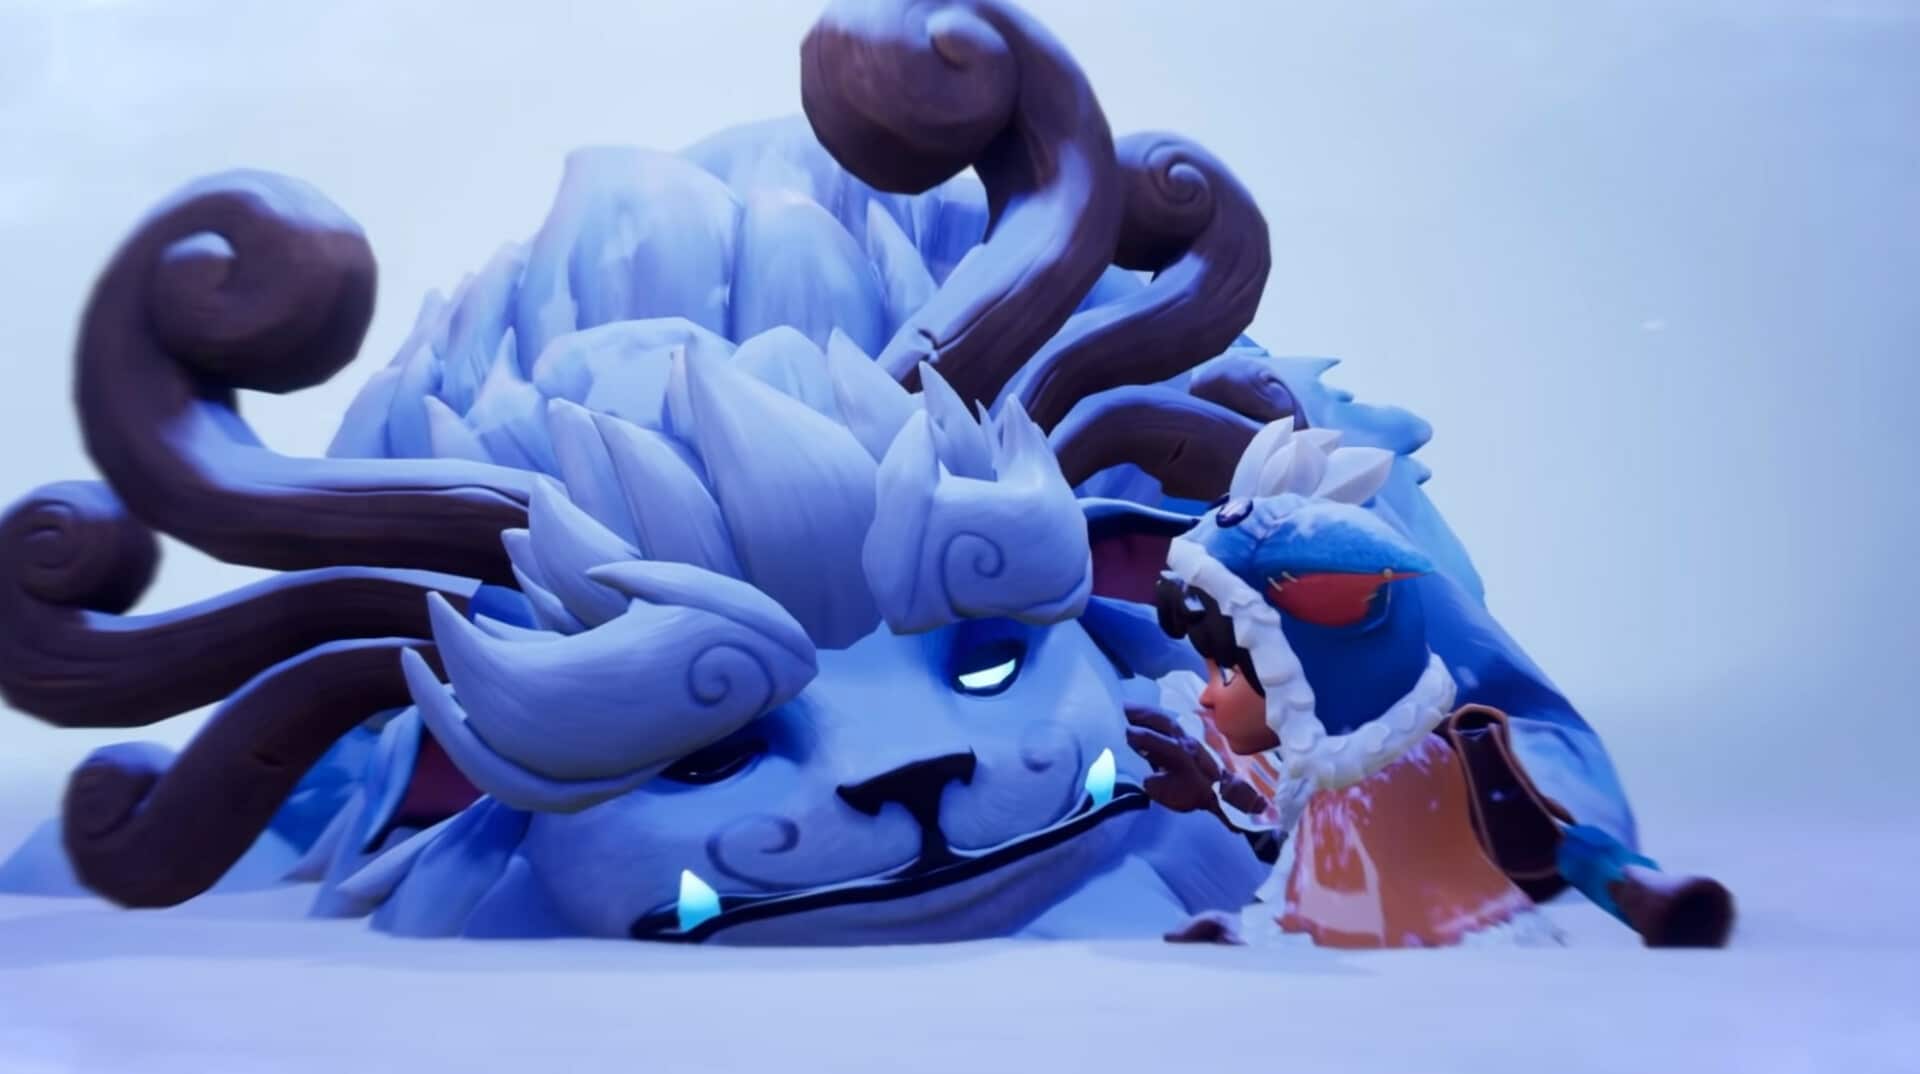 Song of Nunu: A League of Legends Story News and Videos